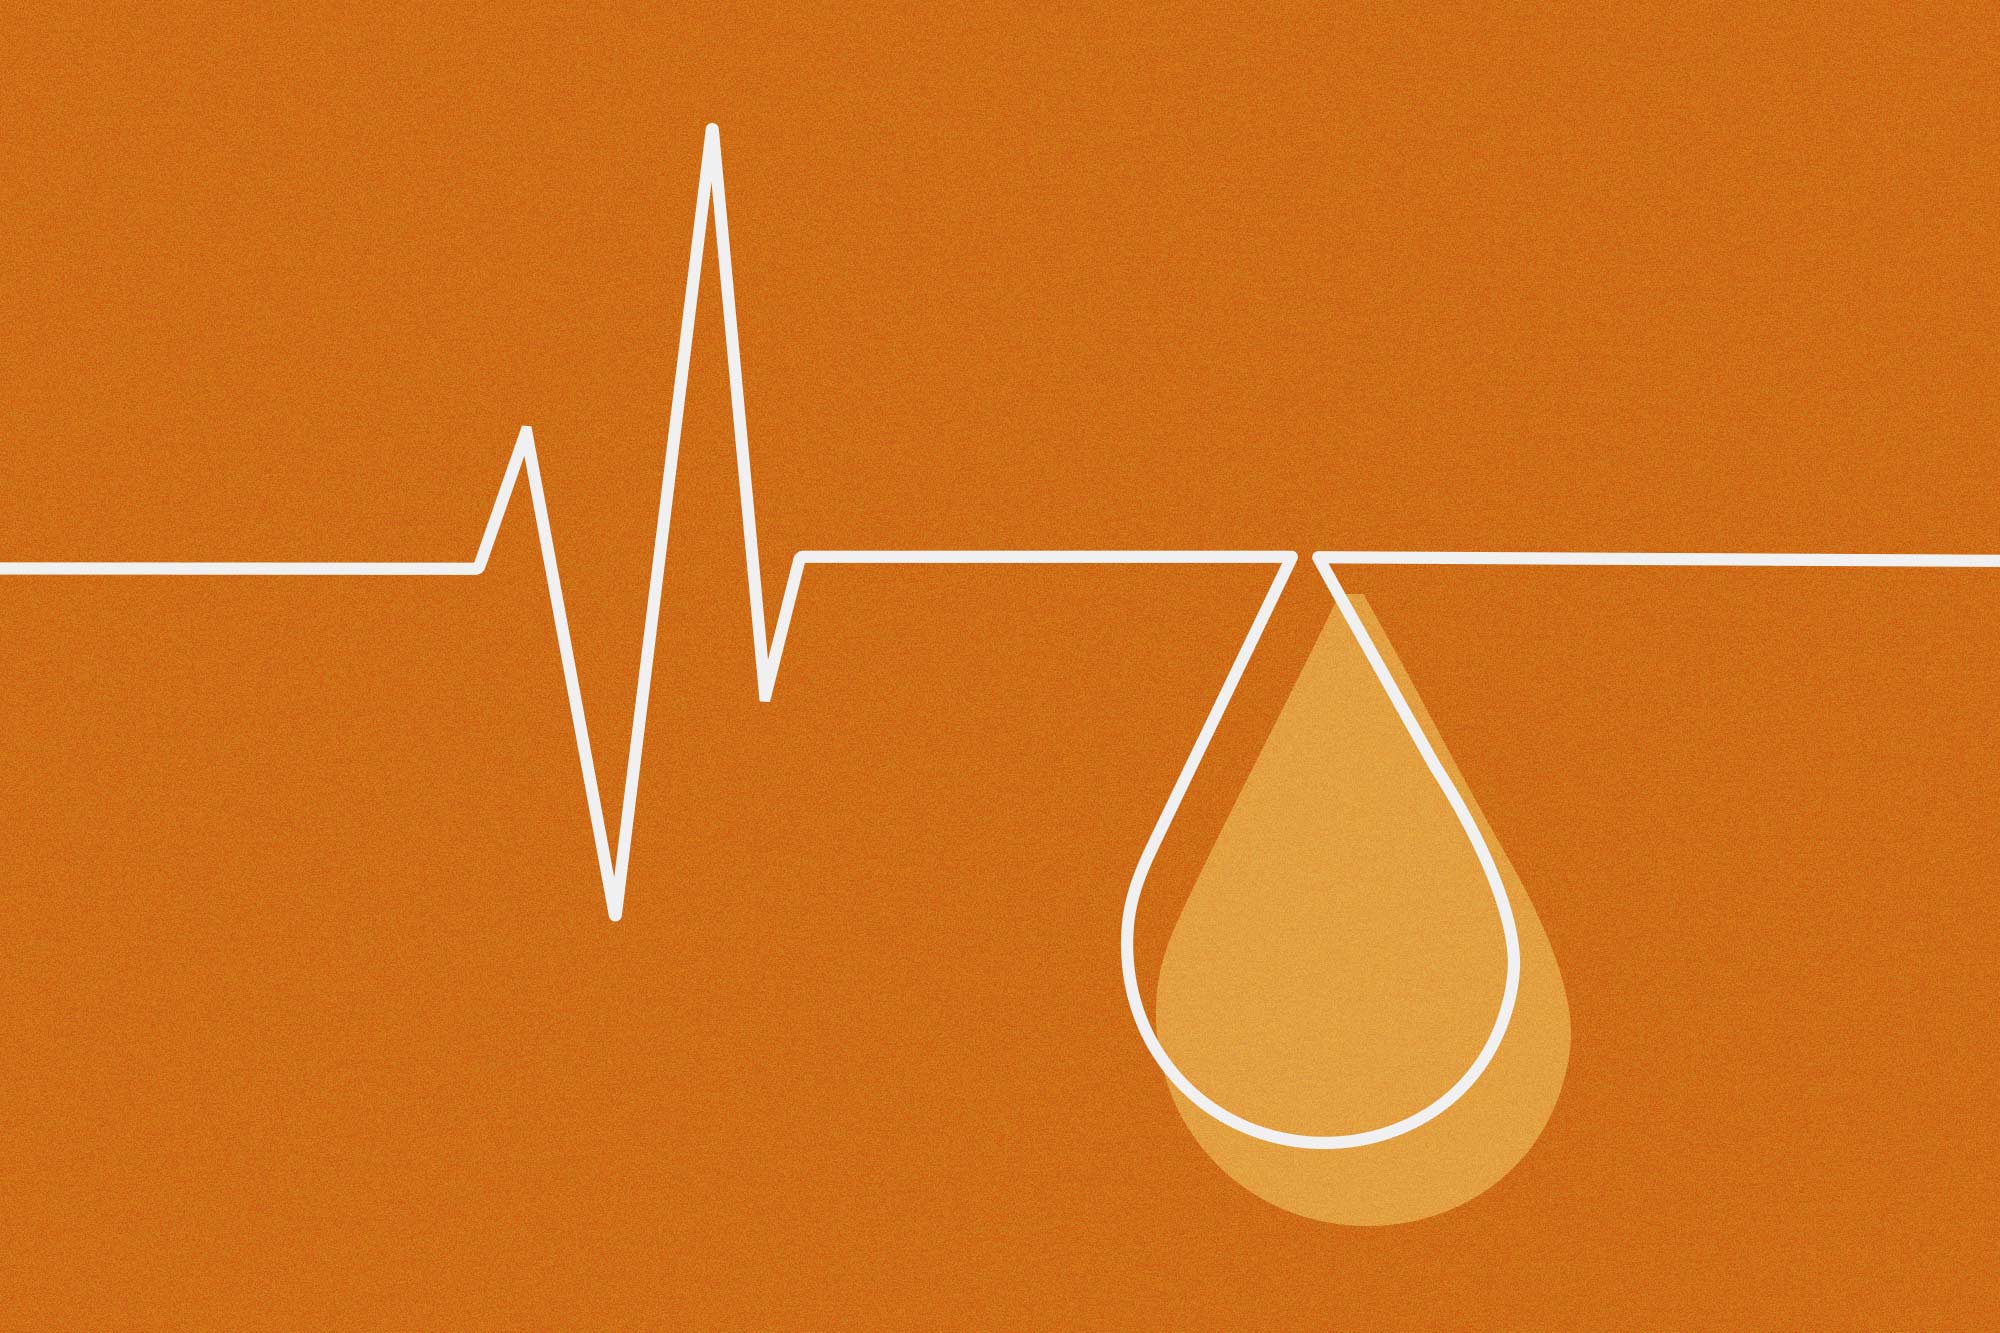 A droplet and a wavy line indicative of a heartbeat on an orange background